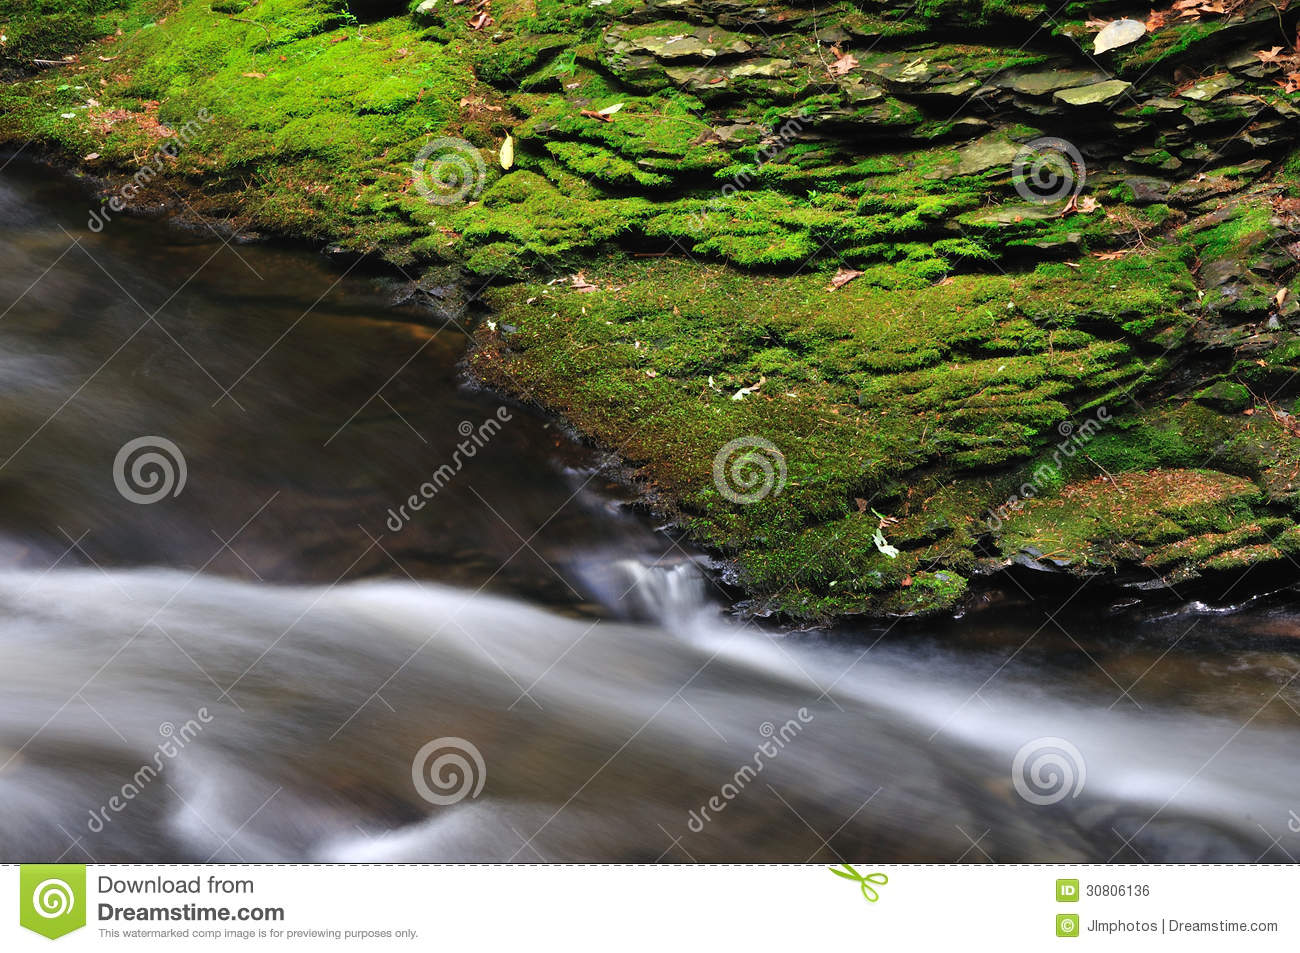 Grees Moss Covered Rock Ledge Over A Flowing Brook Royalty Free Stock